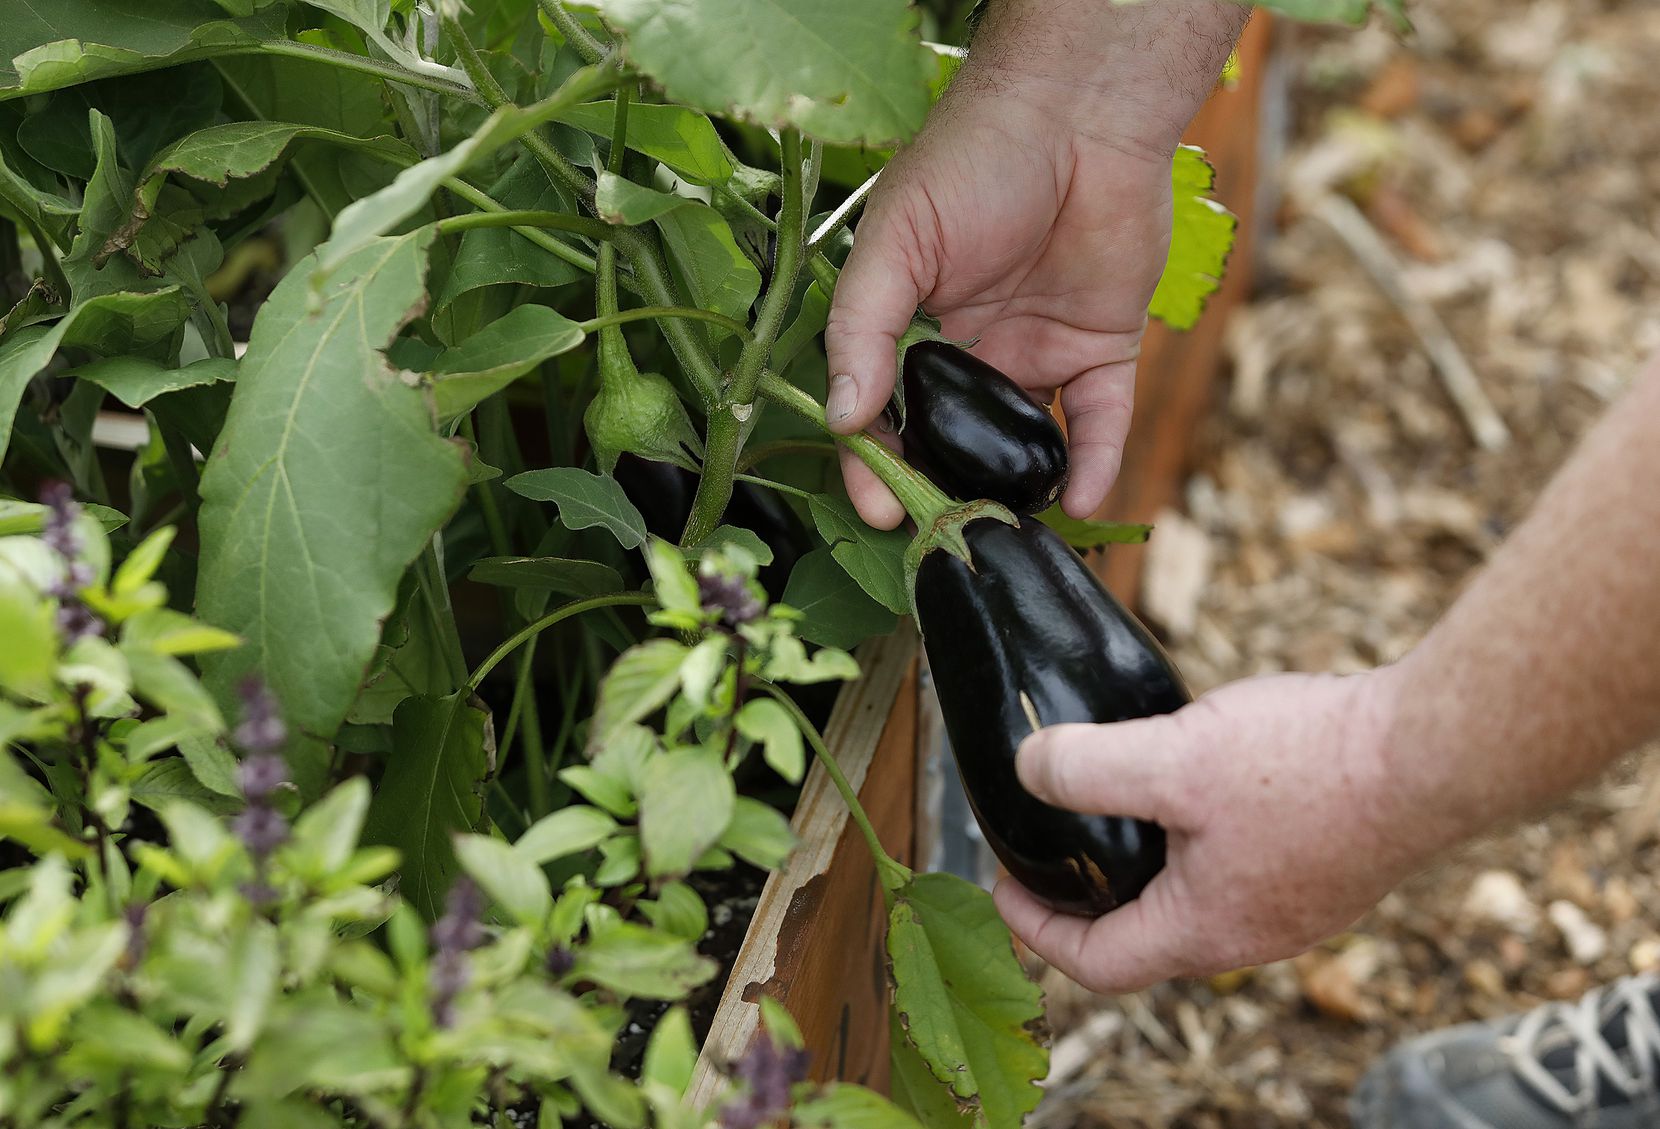 Owen Lynch, co-founder and executive director of Restorative Farms in Dallas, shows an eggplant being grown.